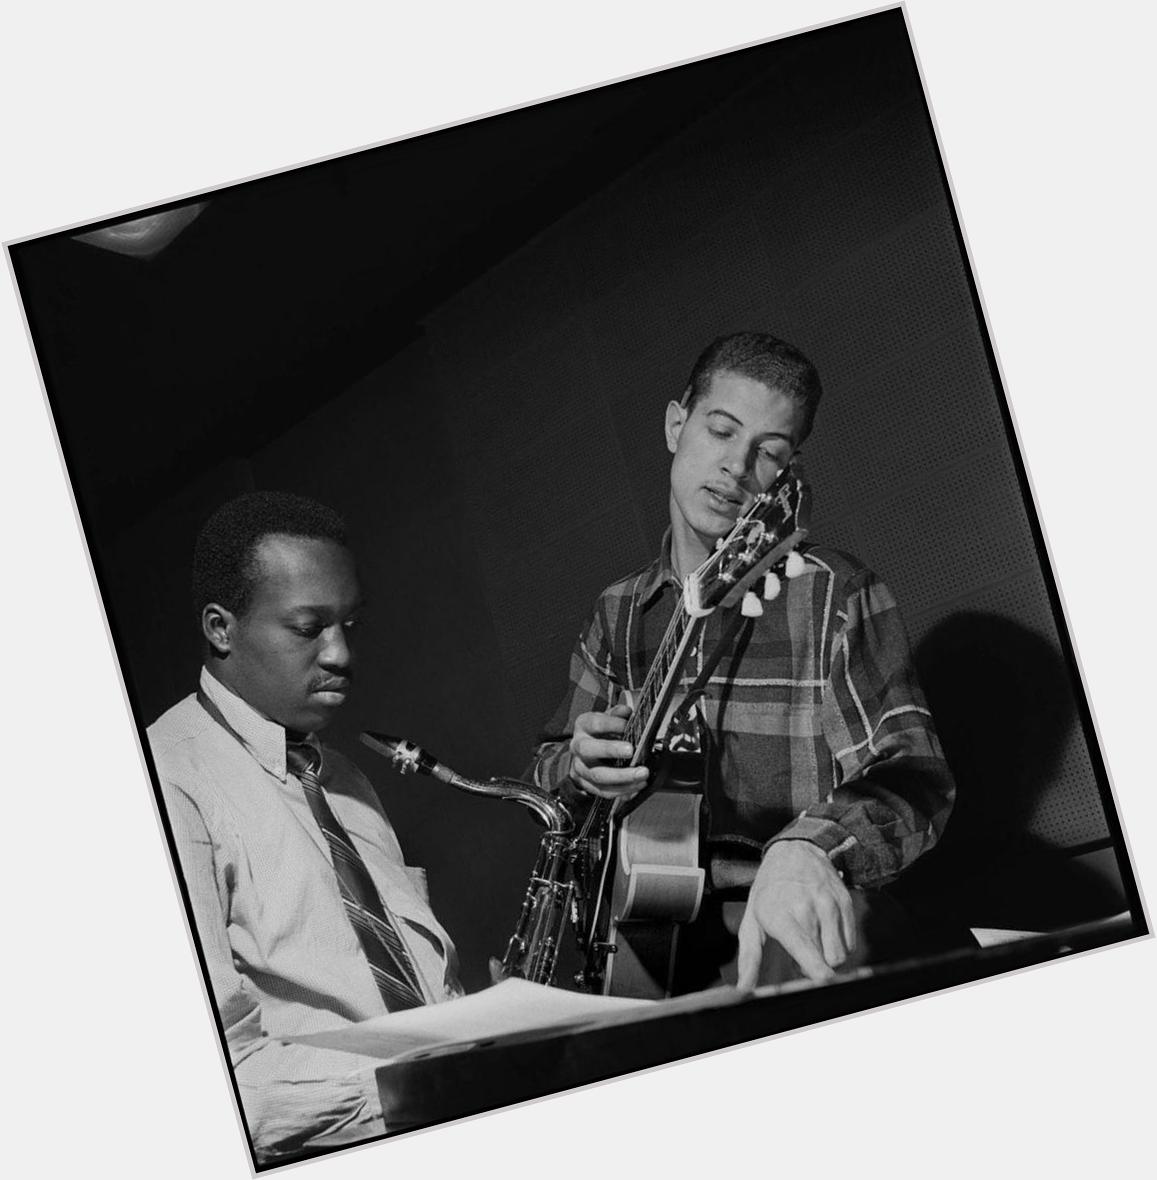 Happy Birthday Kenny Burrell [born July 31, 1931] pictured here with Hank Mobley 